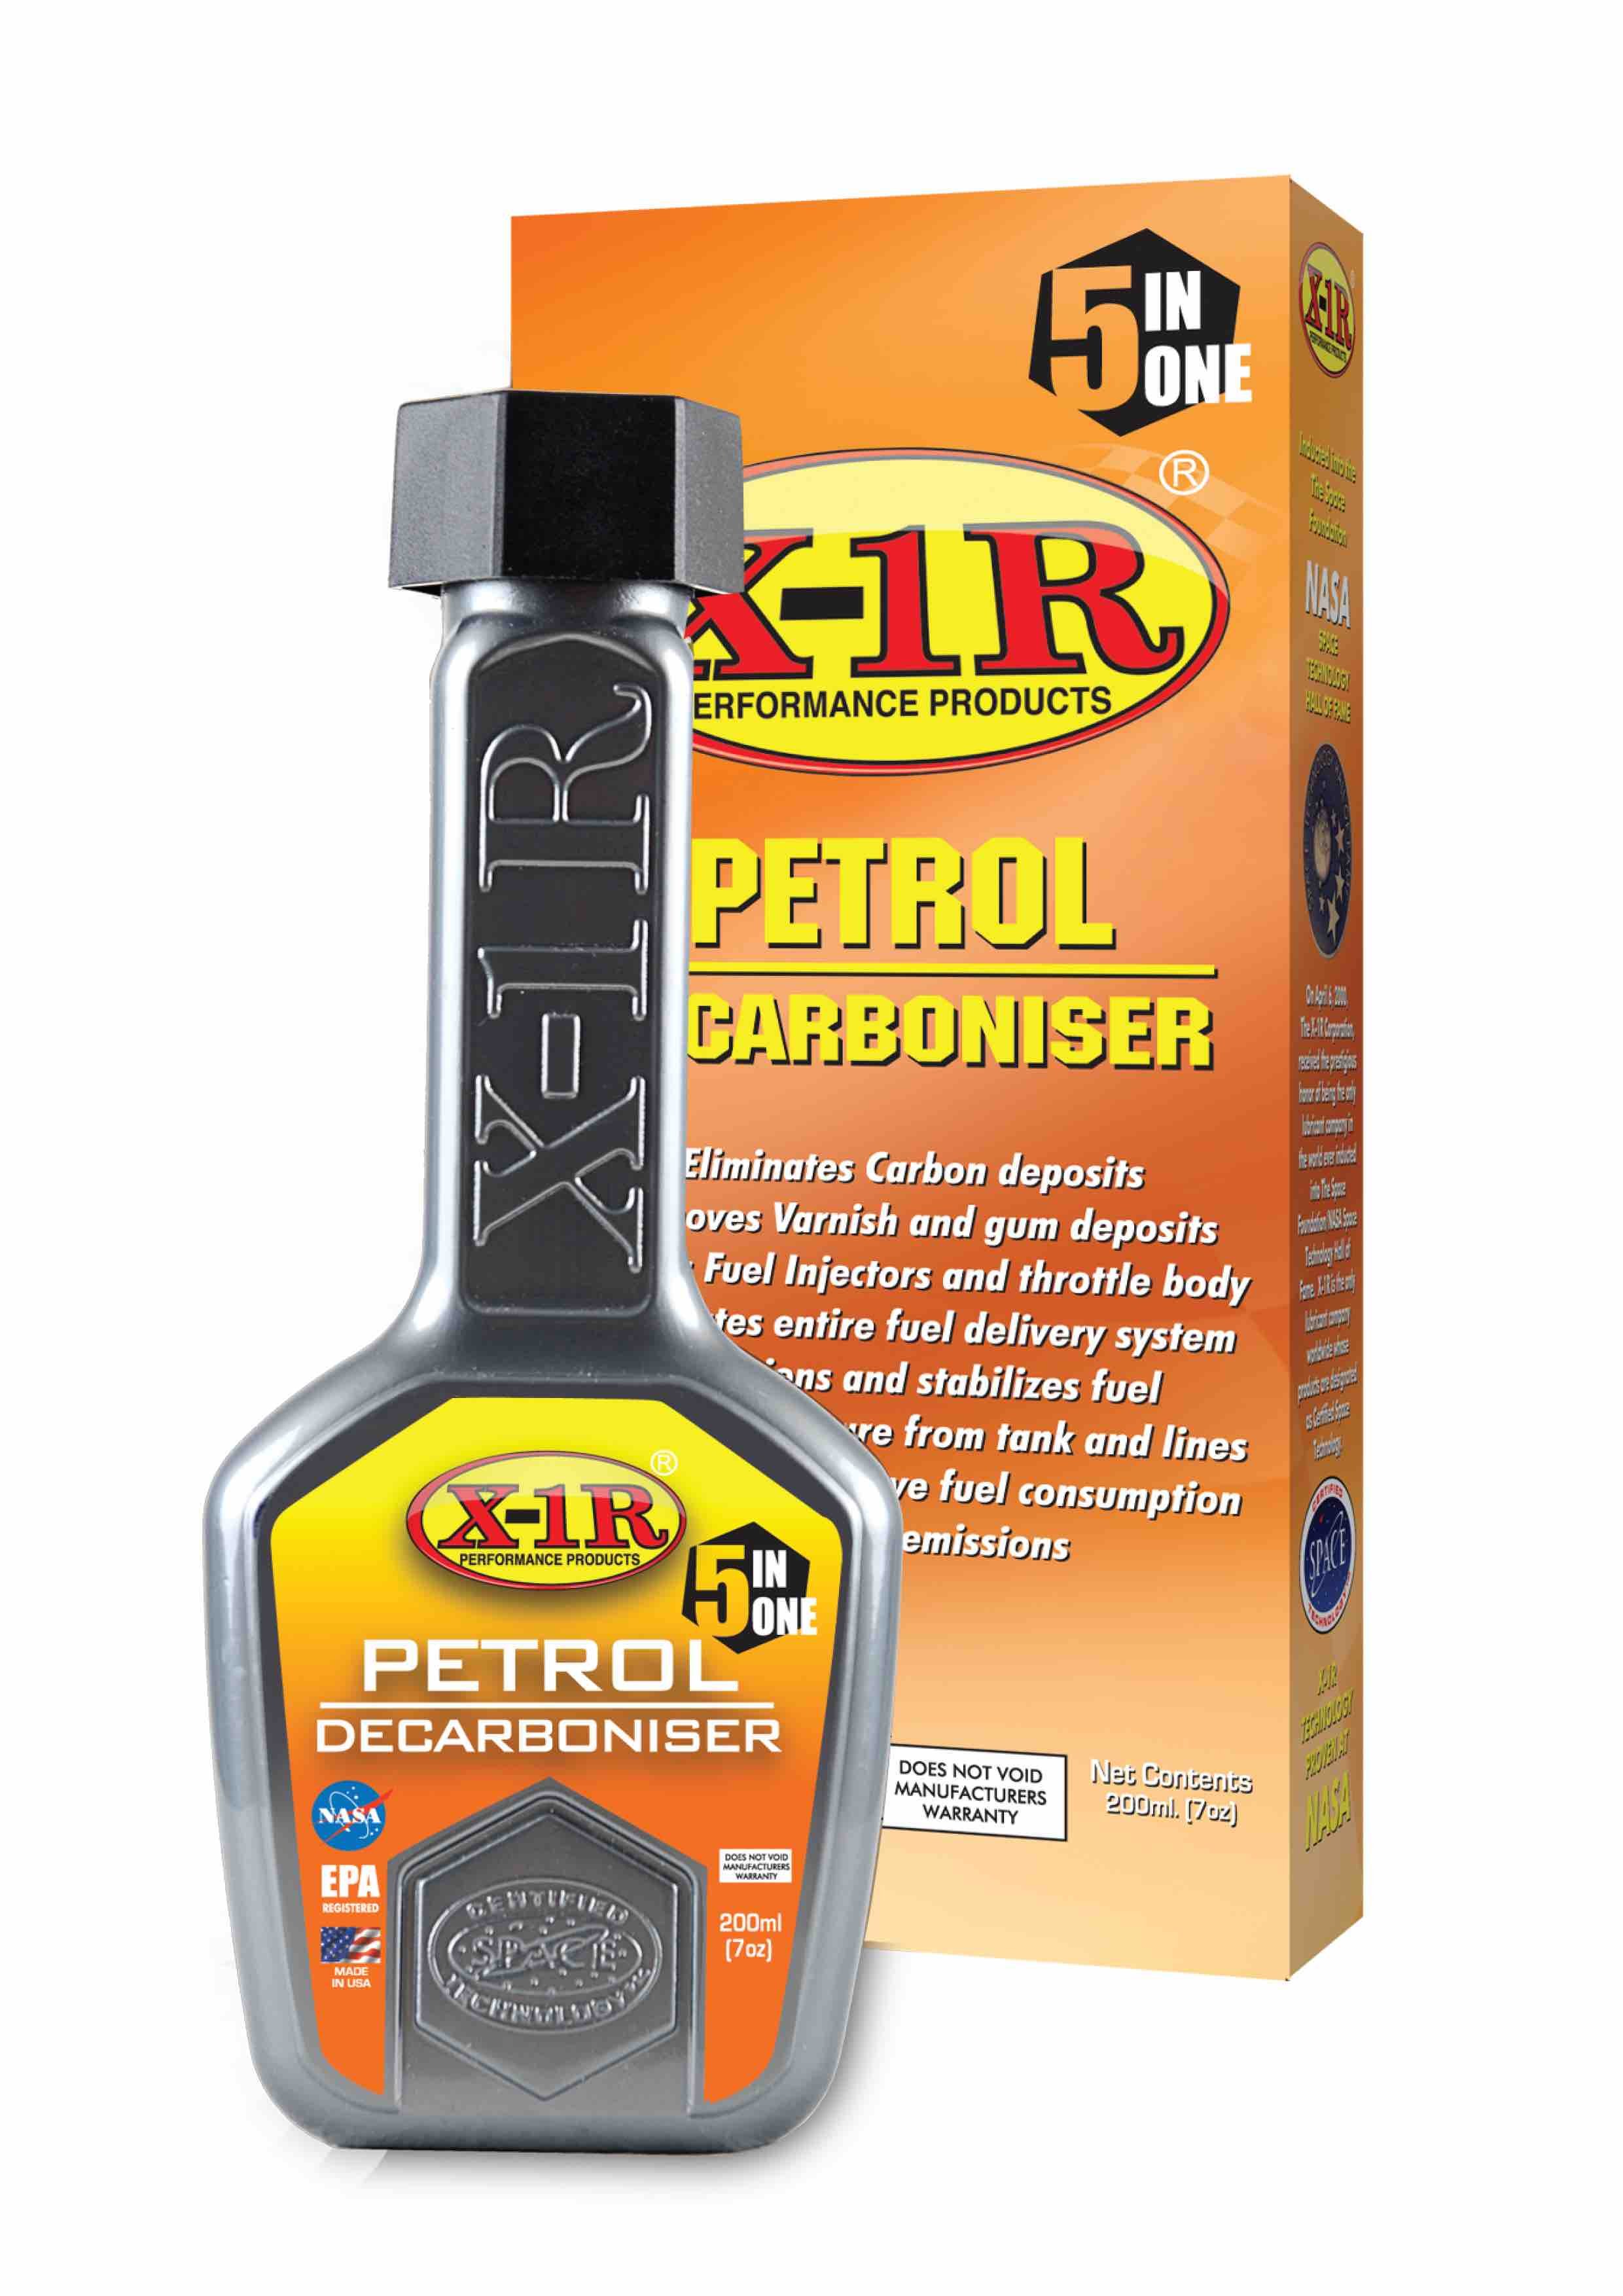 X1R Engine Oil and Fuel Treatments now available online at